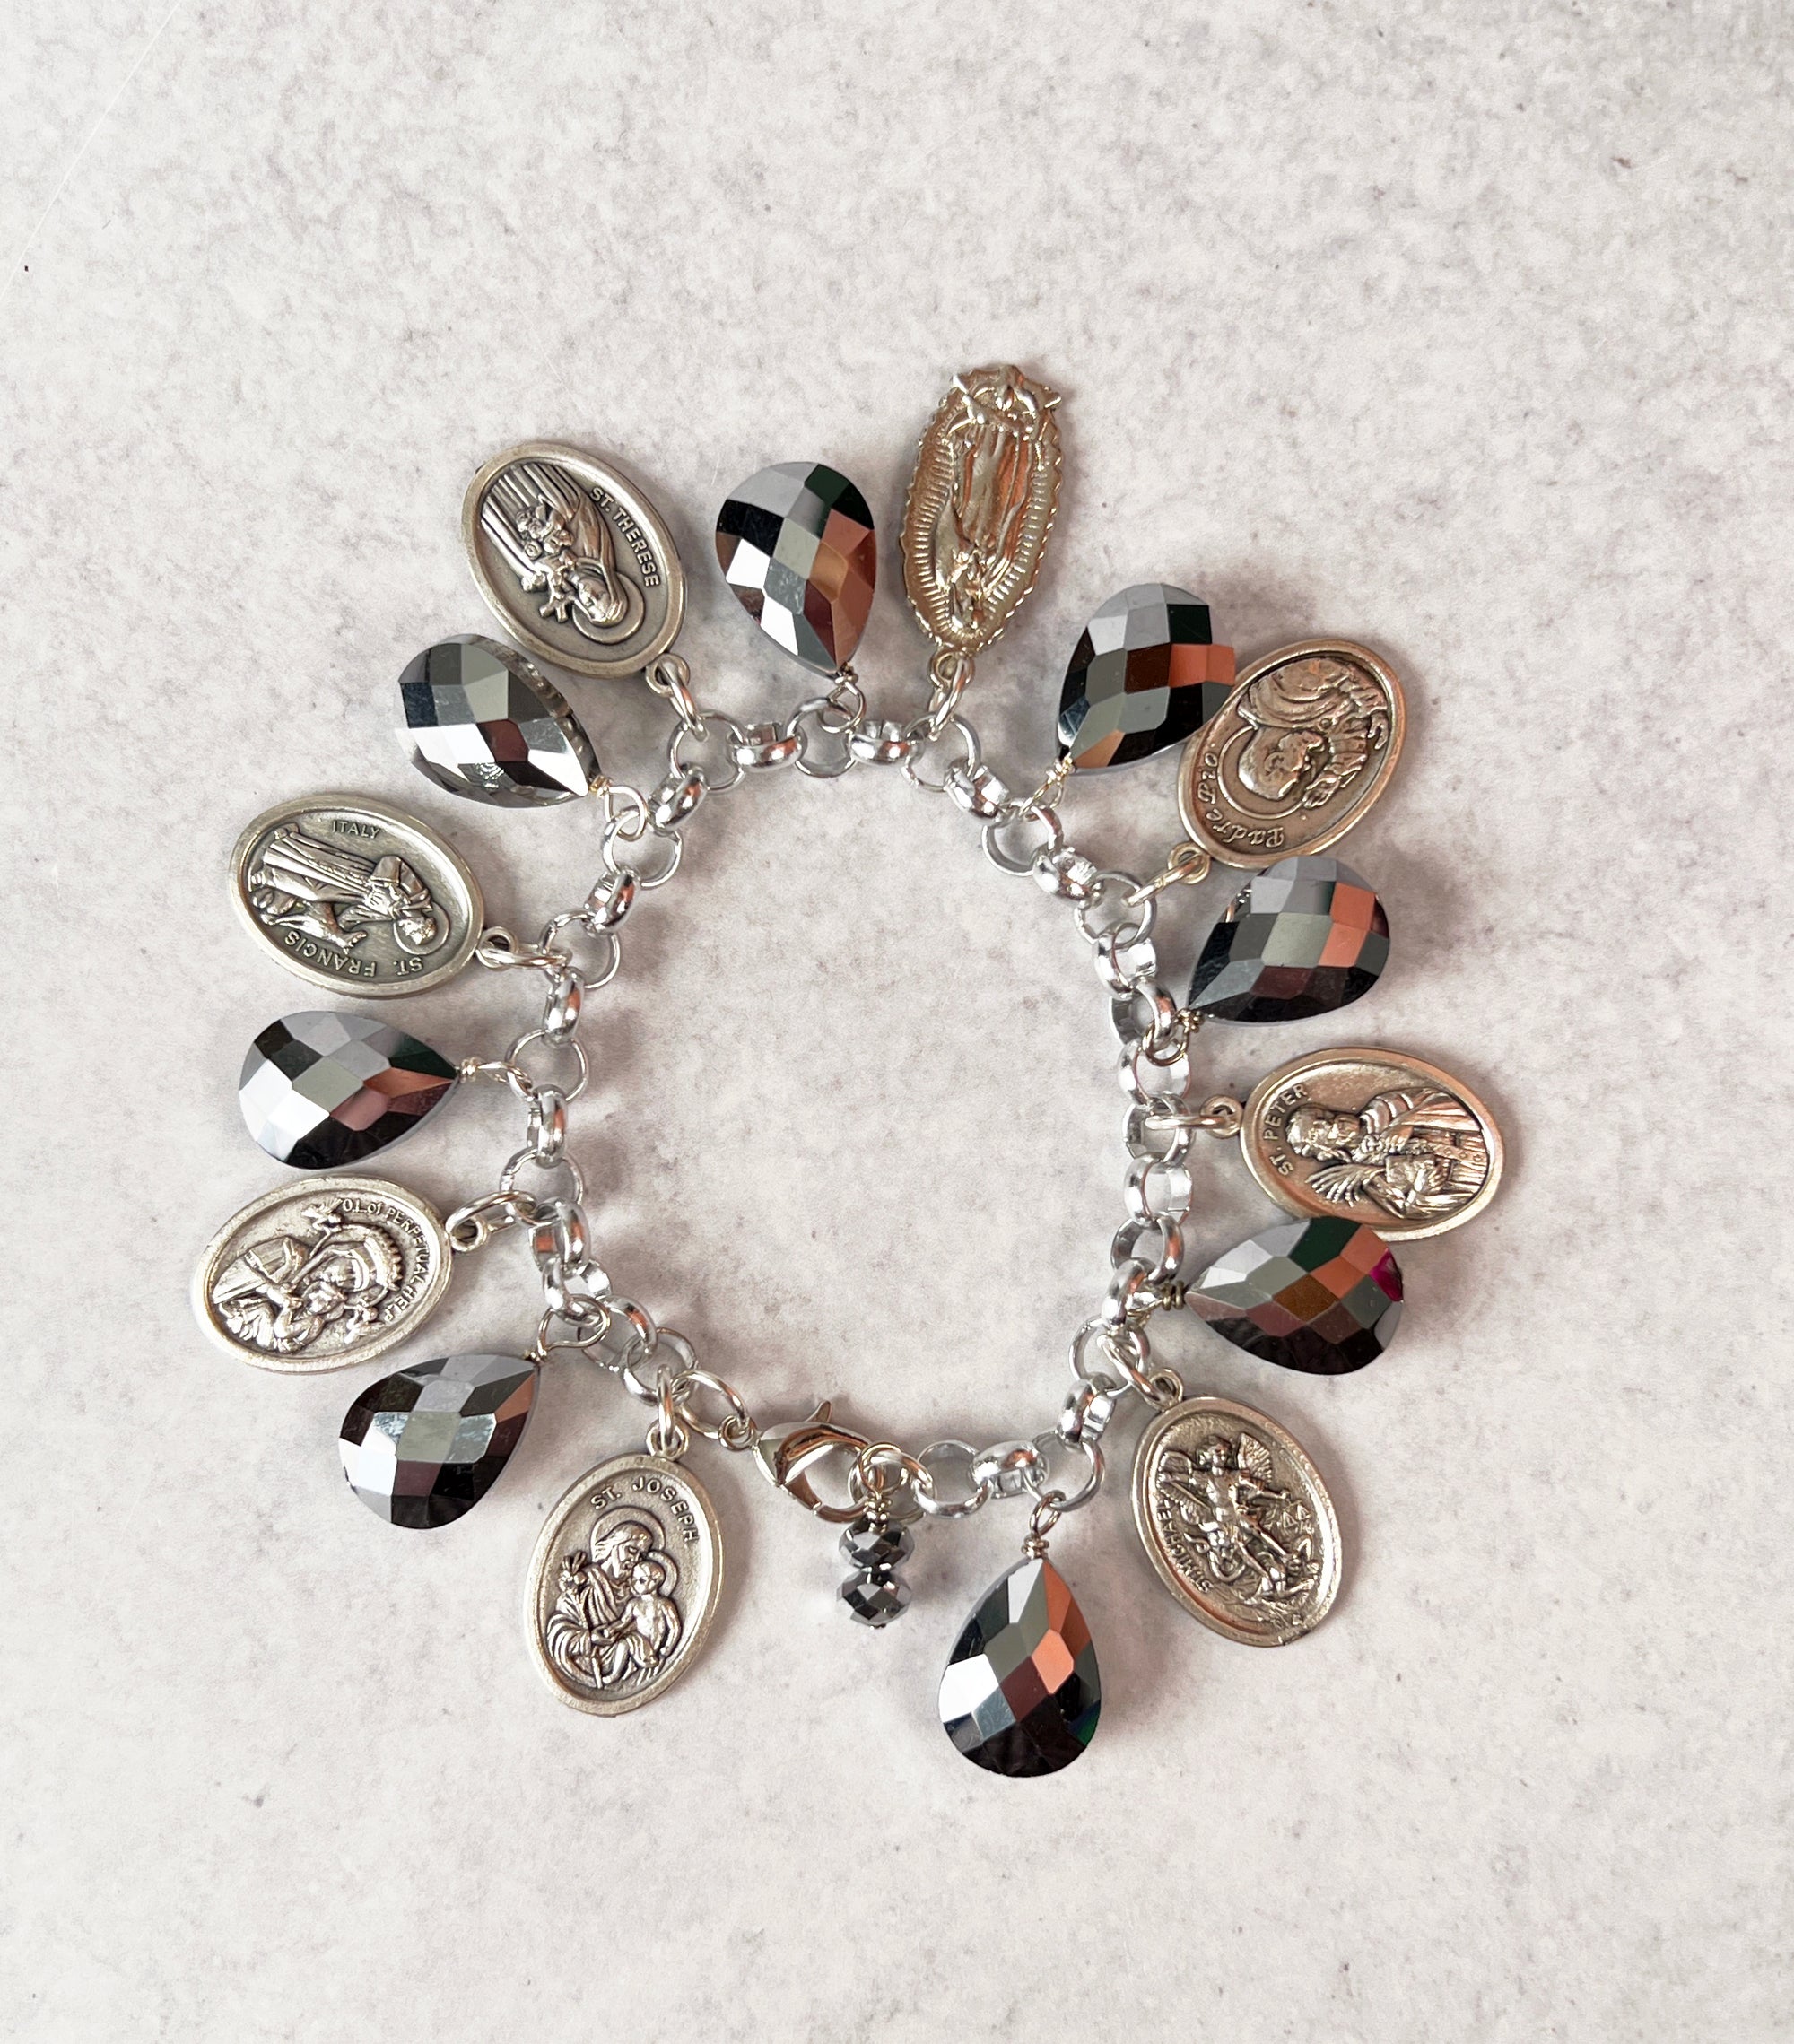 Saint Medals and Silver Glass Bead Charm Bracelet